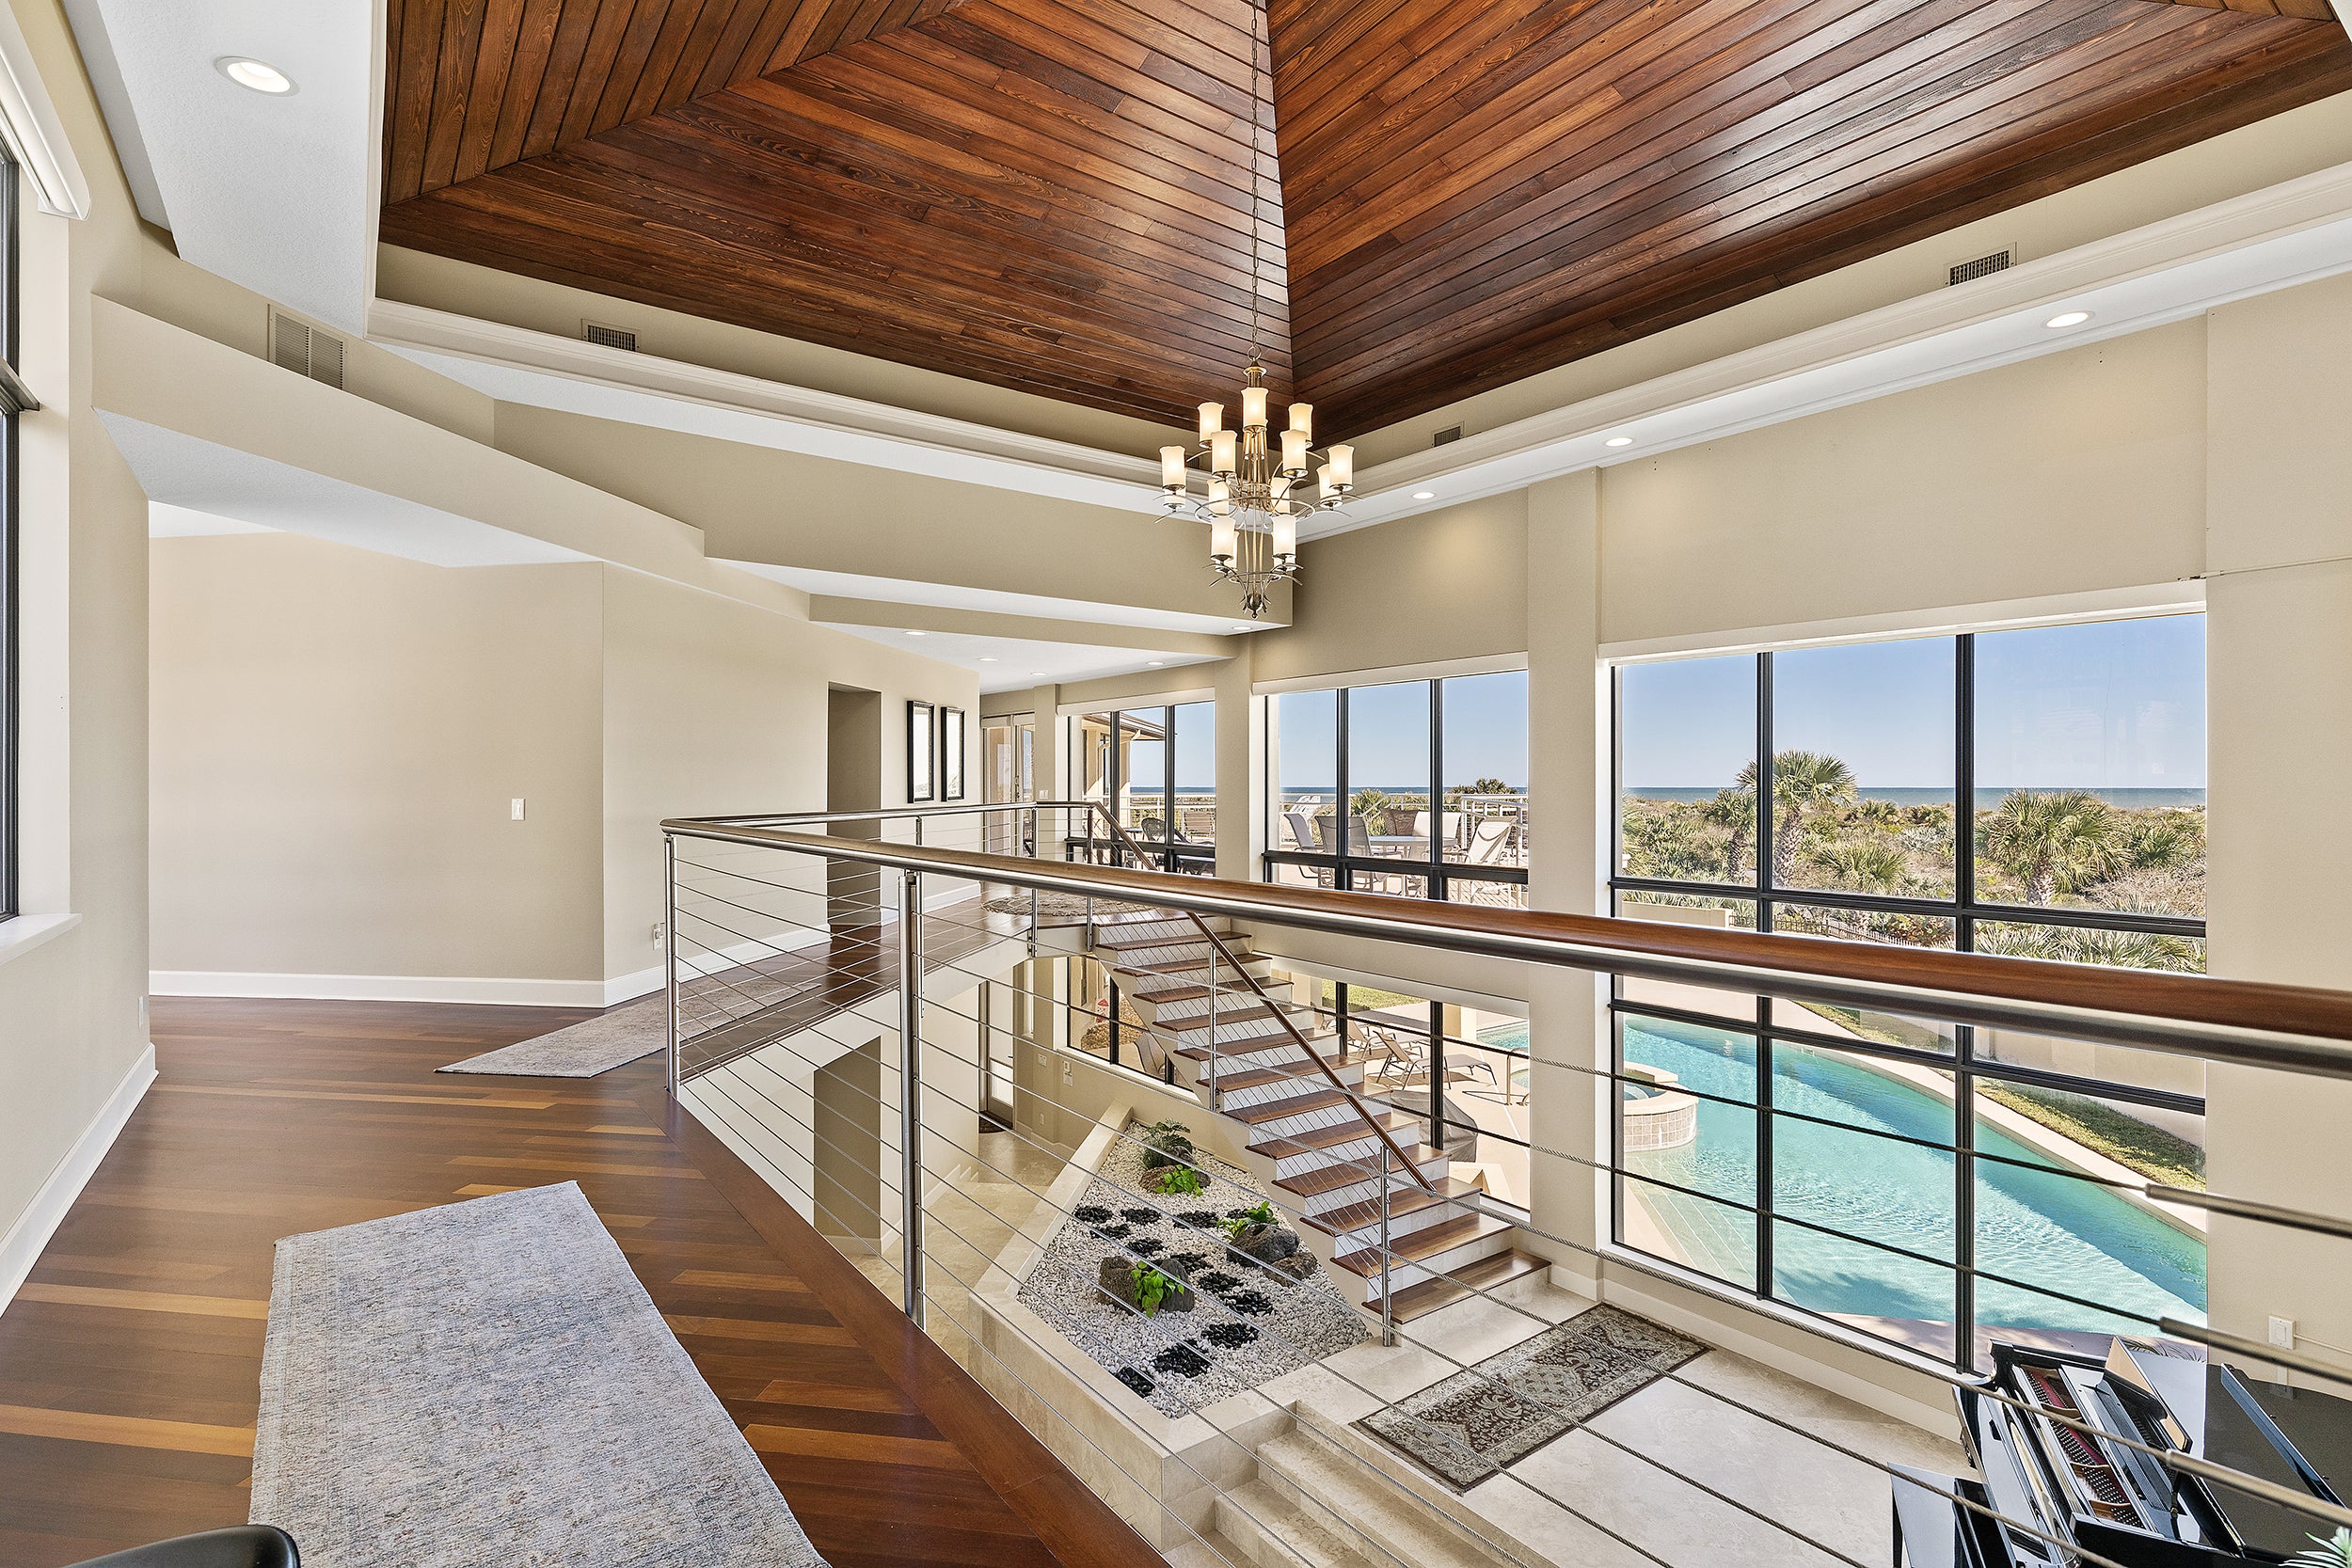 Second floor with pool and beach views